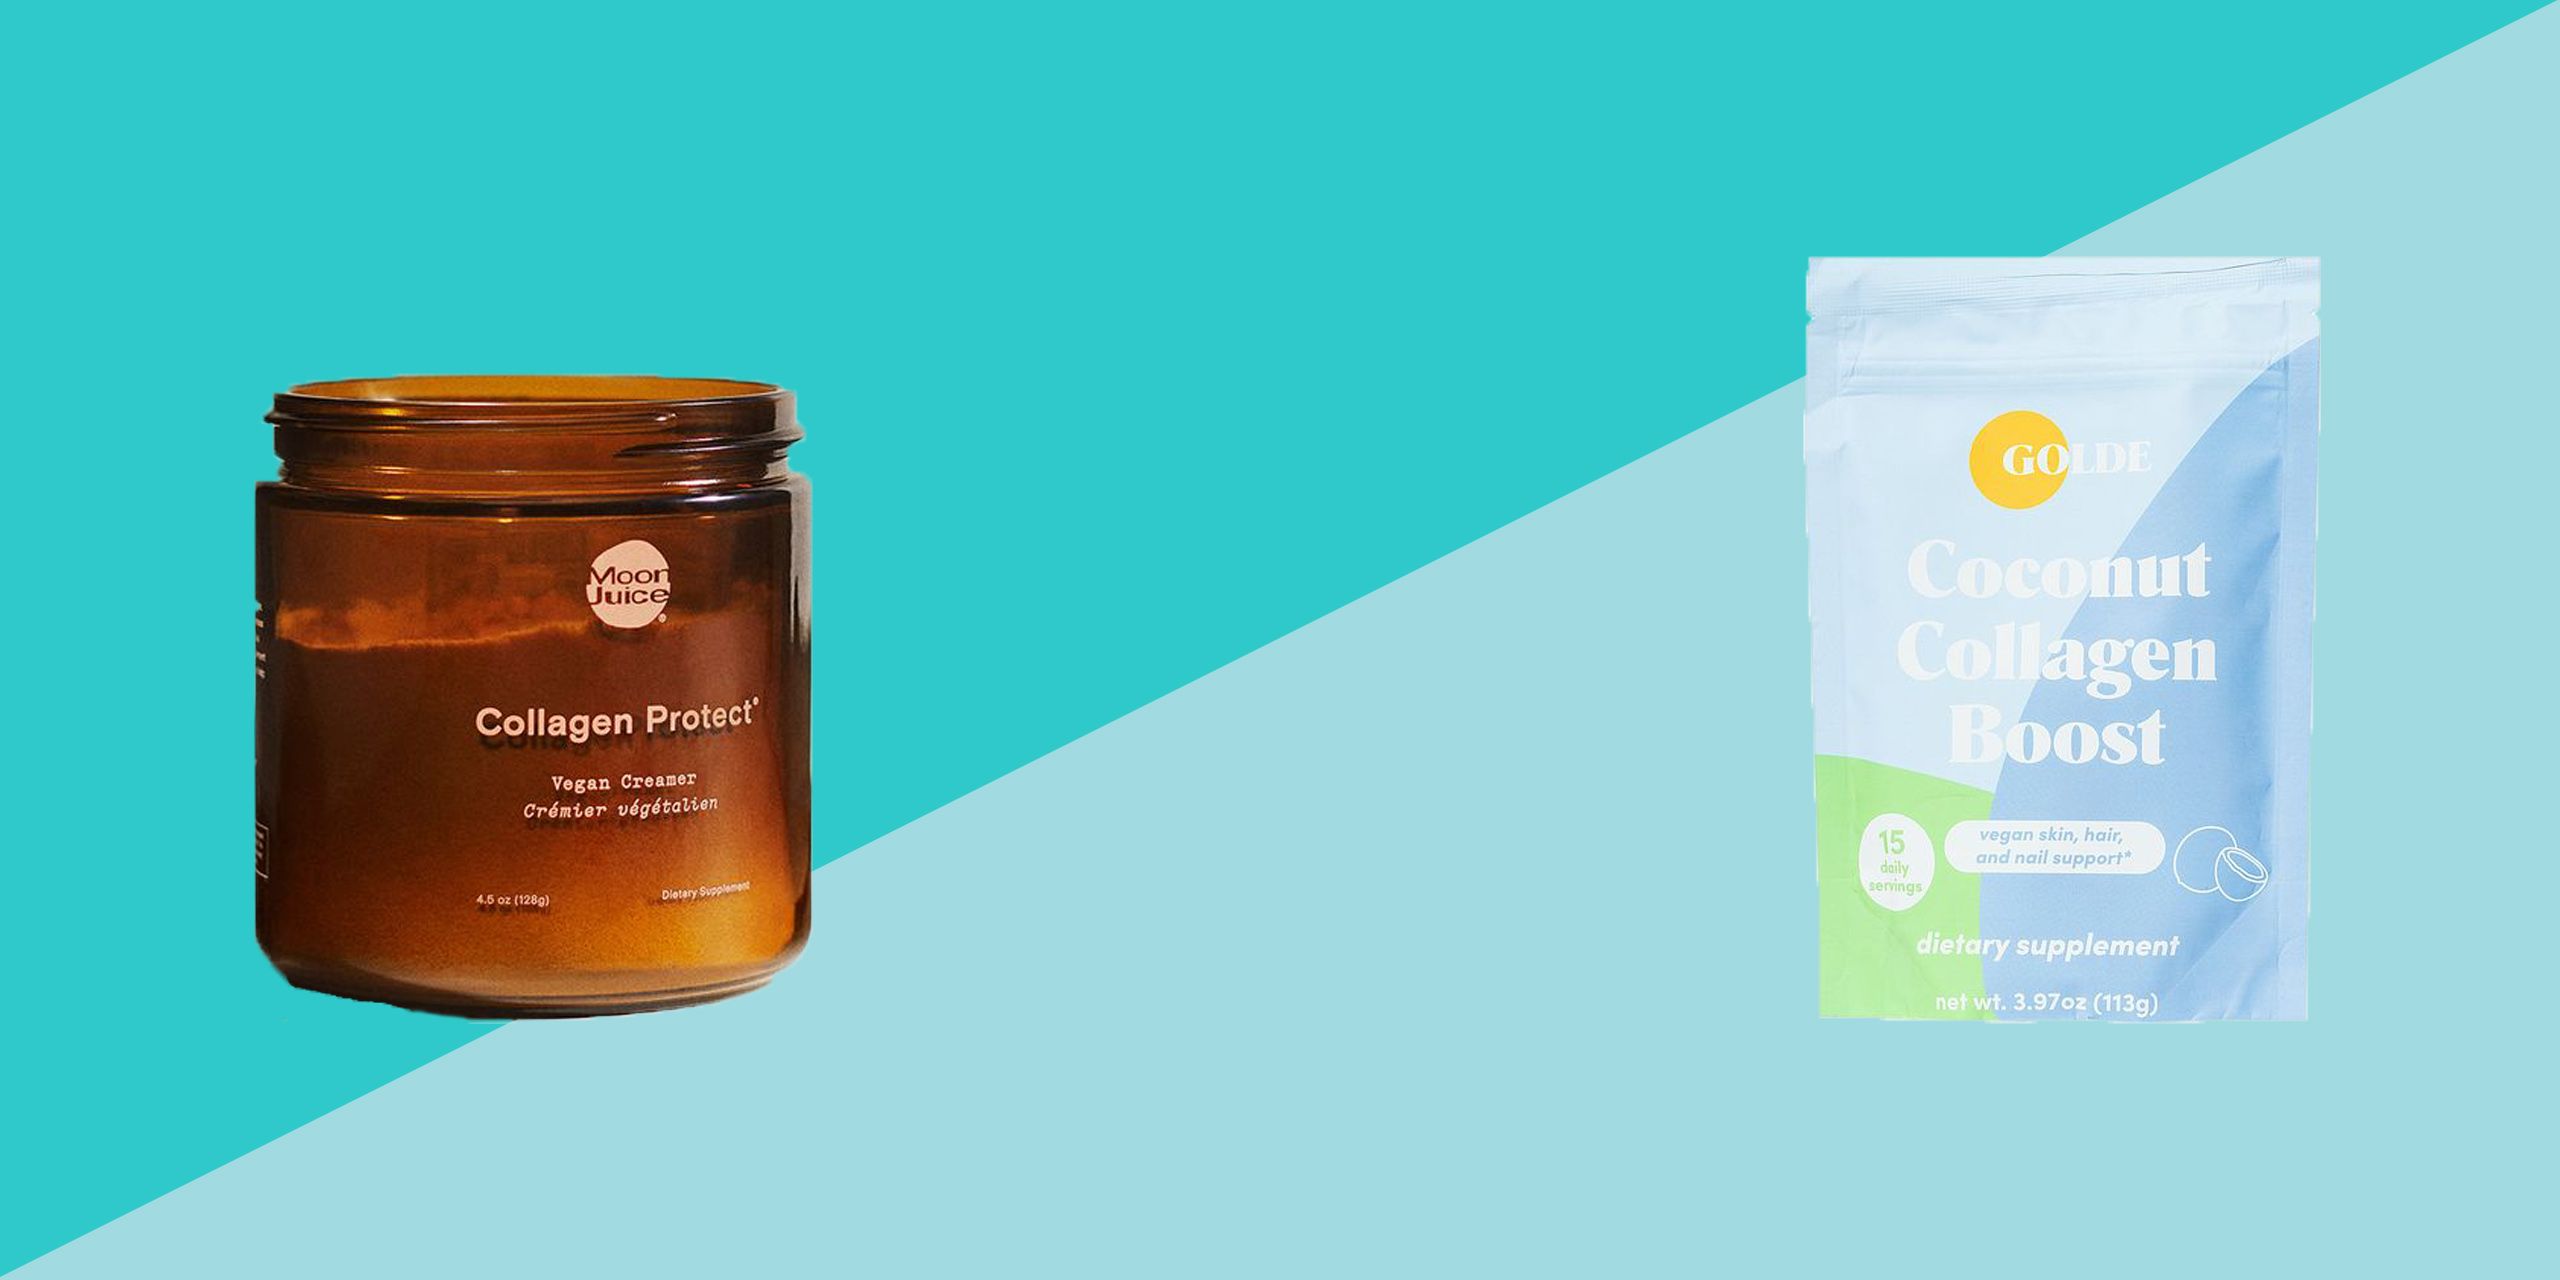 6 Best Vegan Collagen Supplements to Try, According to Experts